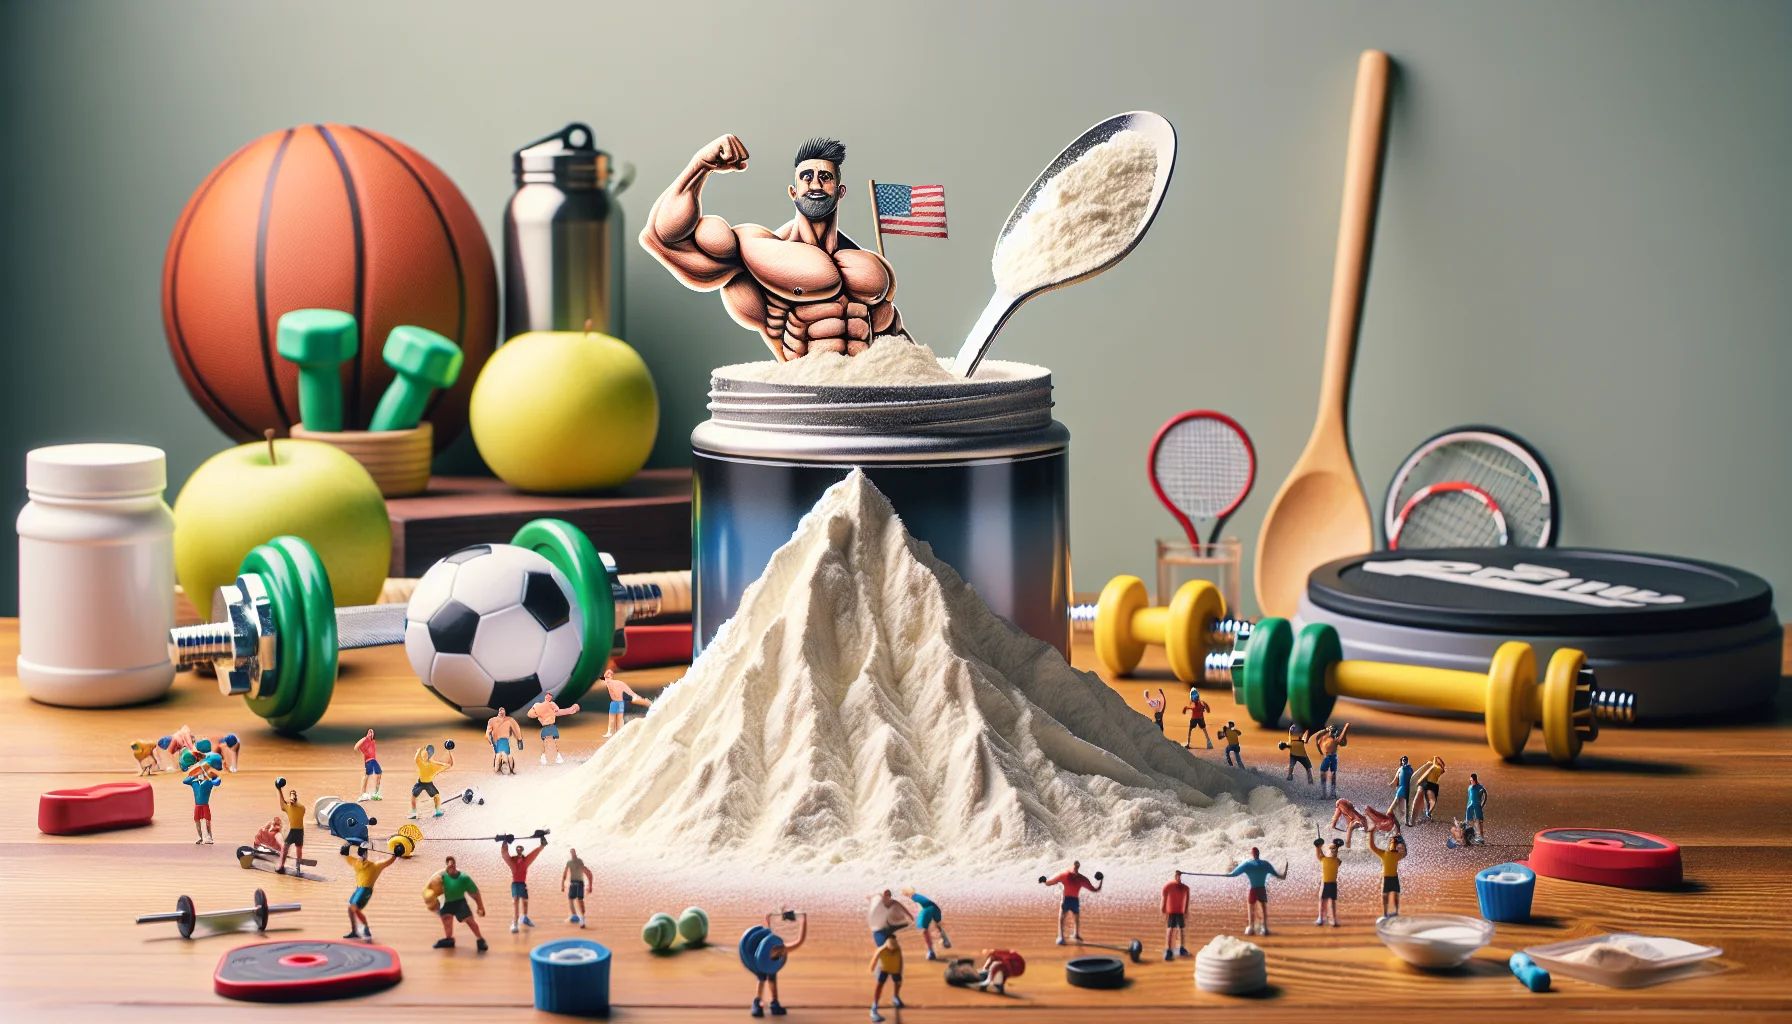 Imagine a humorous and appealing scene involving whey protein isolate for sports supplementation. There is an opened, brightly-colored container of whey protein isolate on a kitchen counter. The powder has exploded out of the container, creating a miniature snow-capped mountain range across the counter. A spoon with a heap of powder is half-buried in the range, resembling a flag planted at a mountain peak. A pair of muscular cartoon arms emerges from the container, flexing and displaying a thumbs up. In the background, a range of different sports equipment like dumbbells, footballs, and tennis rackets is arranged, subtly encouraging the viewer towards a fitness-themed lifestyle.